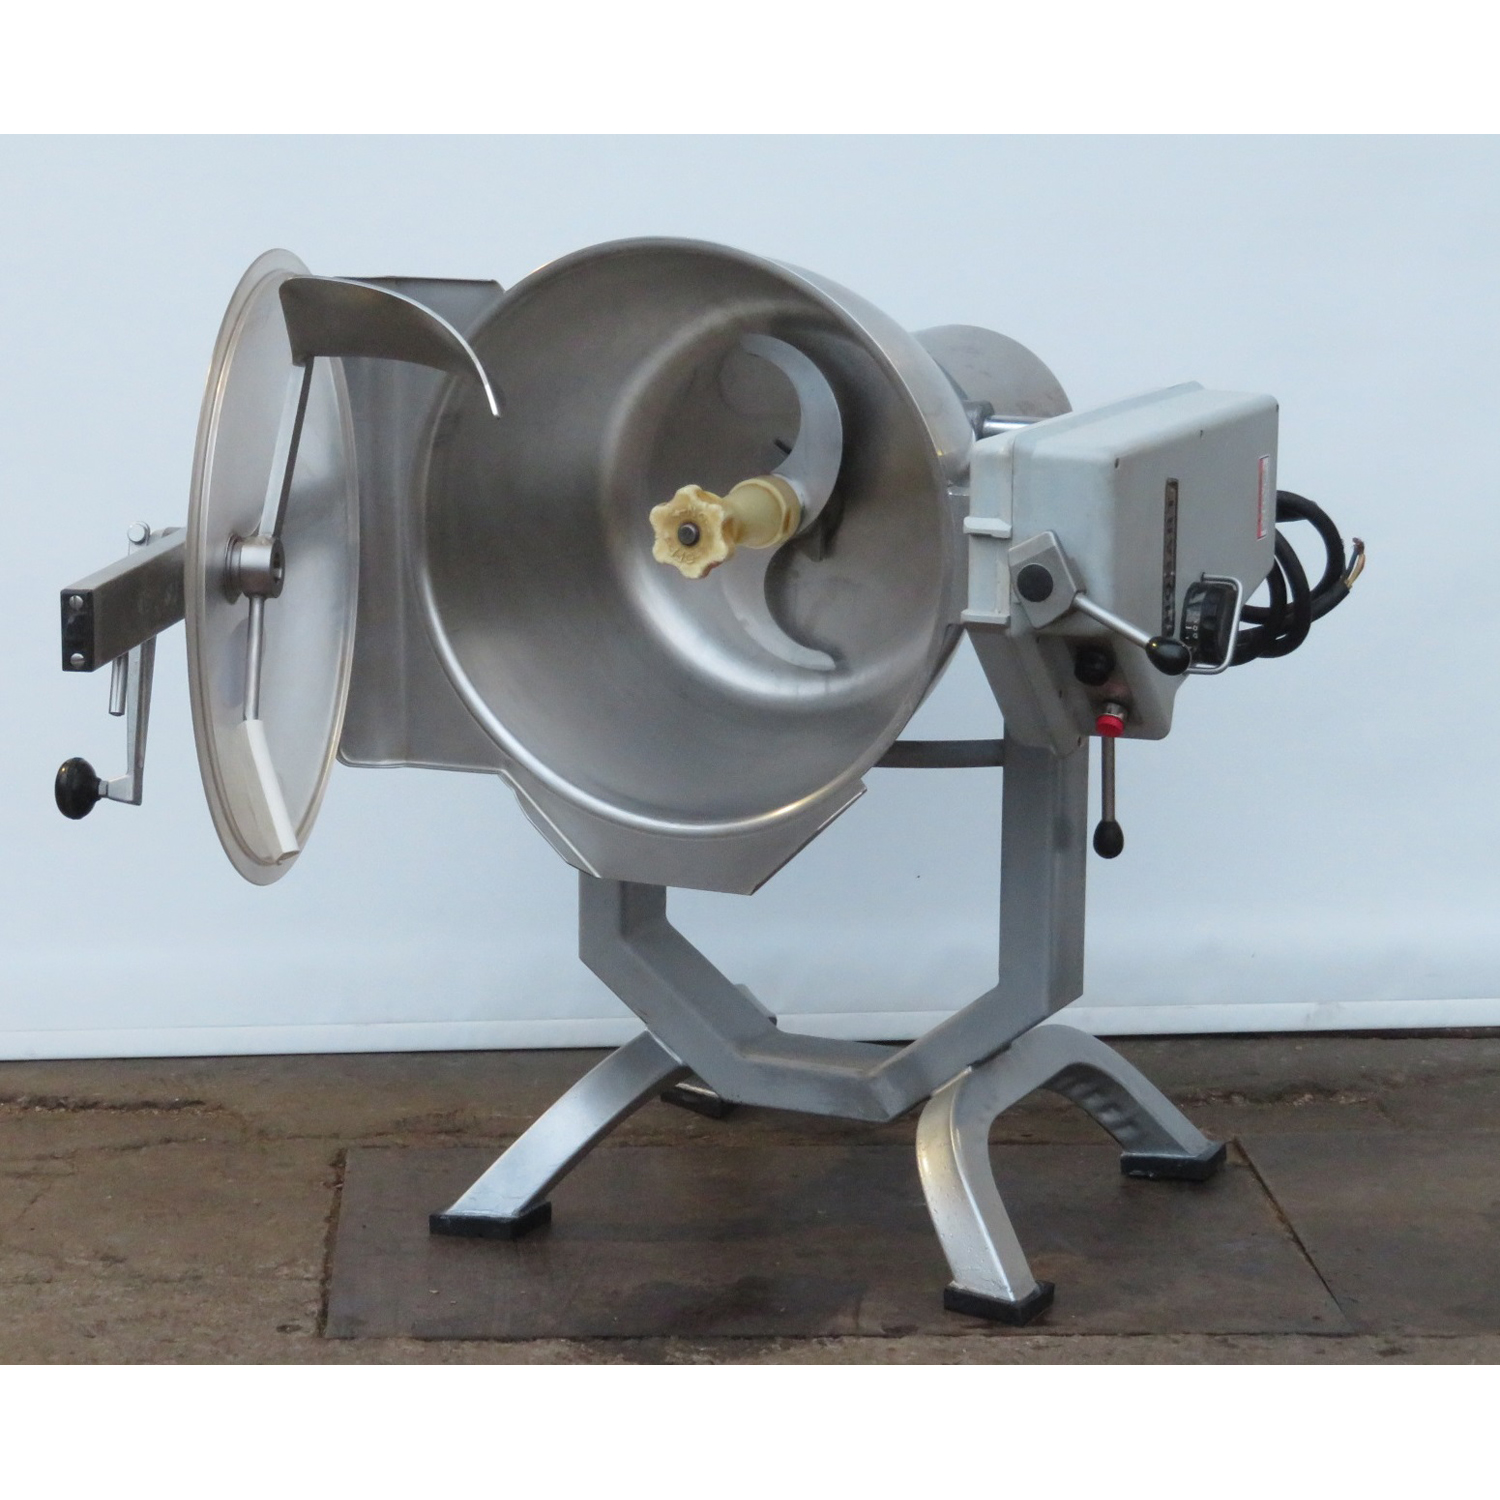 Hobart HCM-450 45 Quart Vertical Cutter Mixer, Used Great Condition image 2